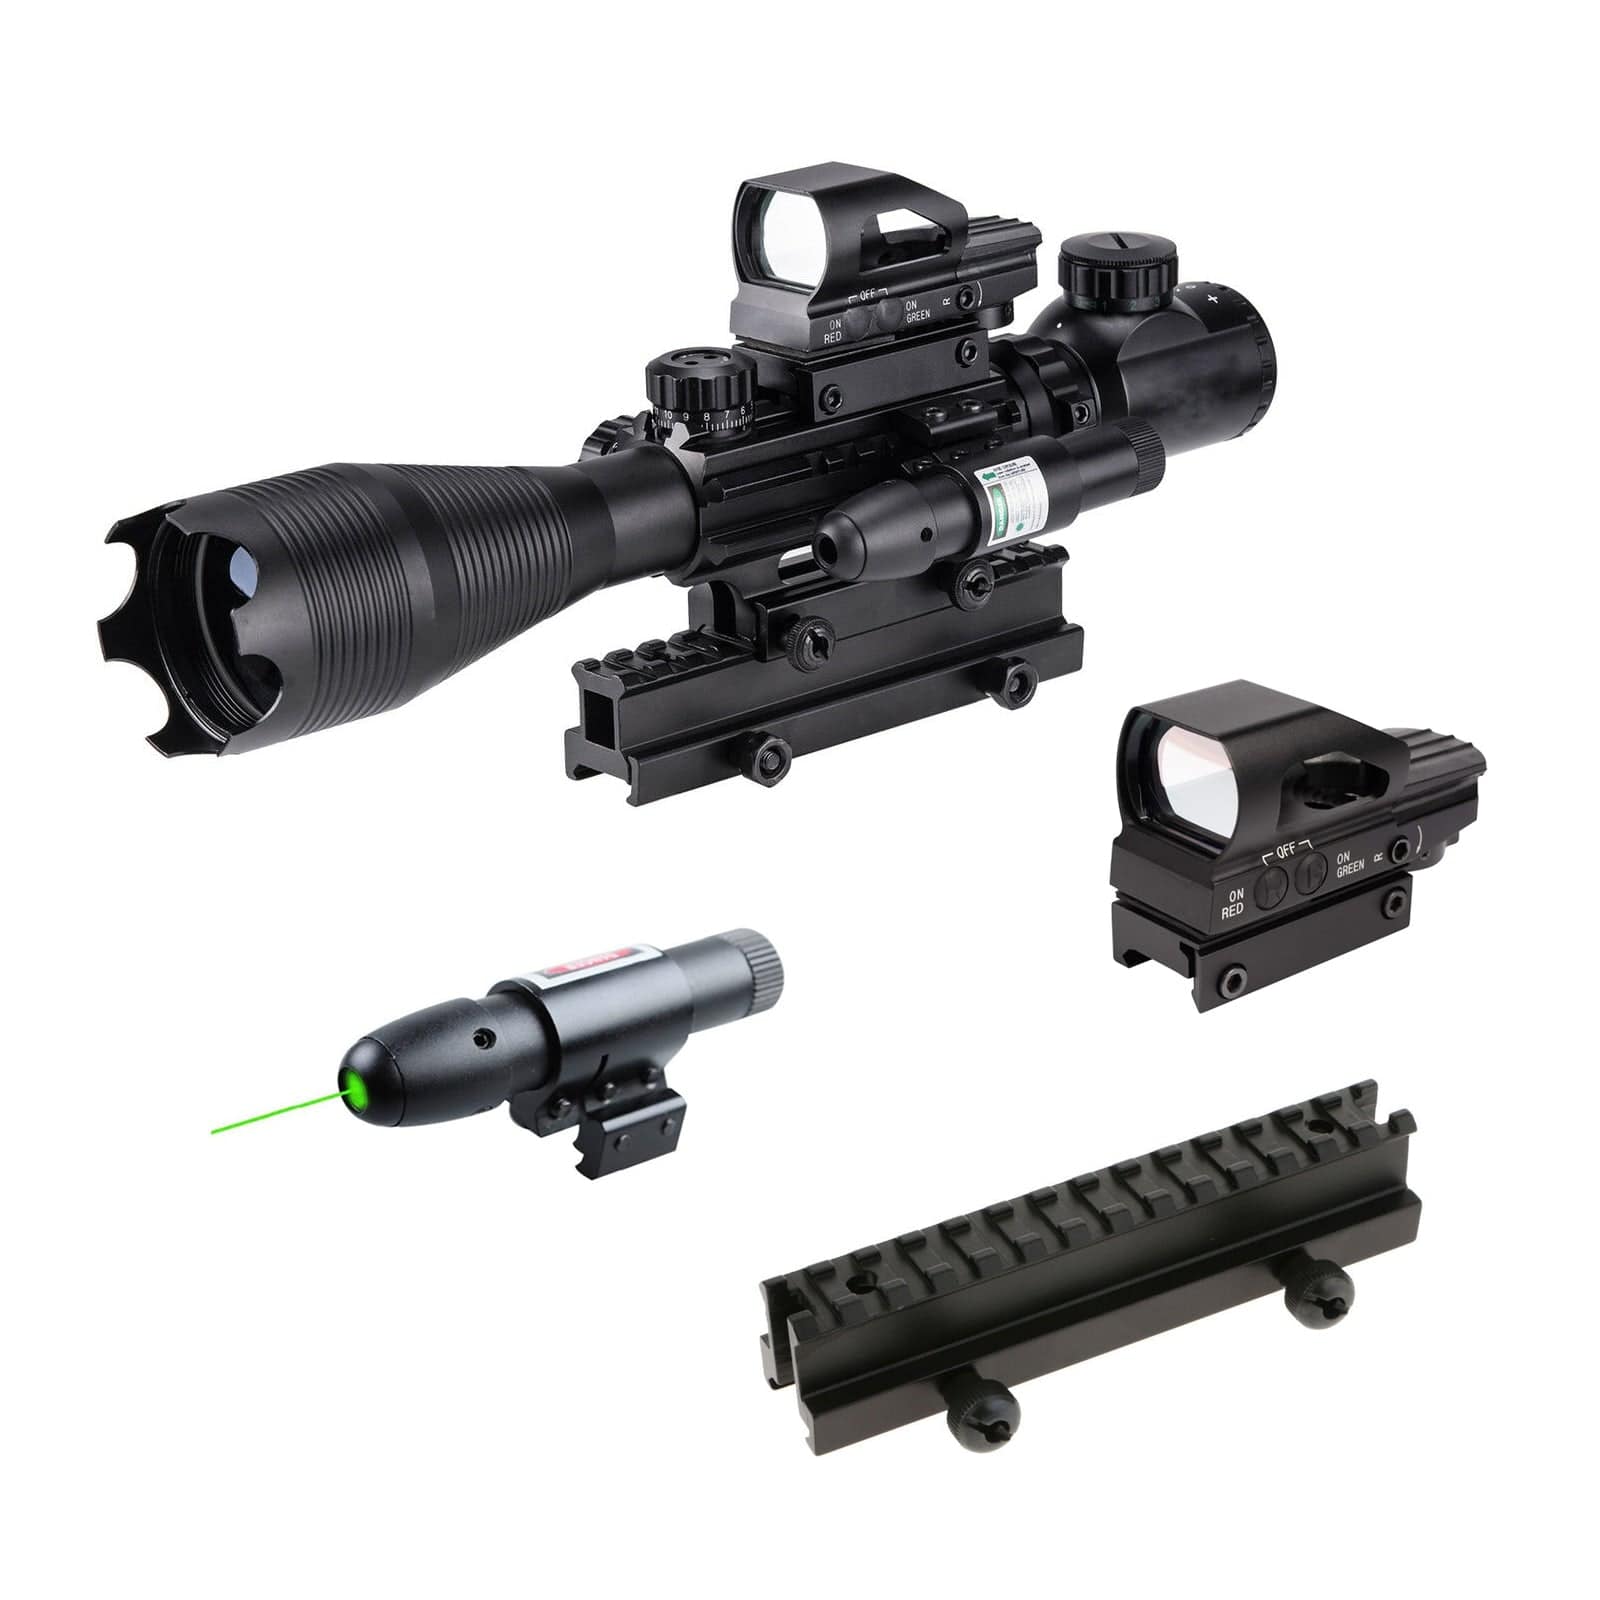 TAC-3: 4 Piece 4-16x50 Illuminated Reticle Scope Package